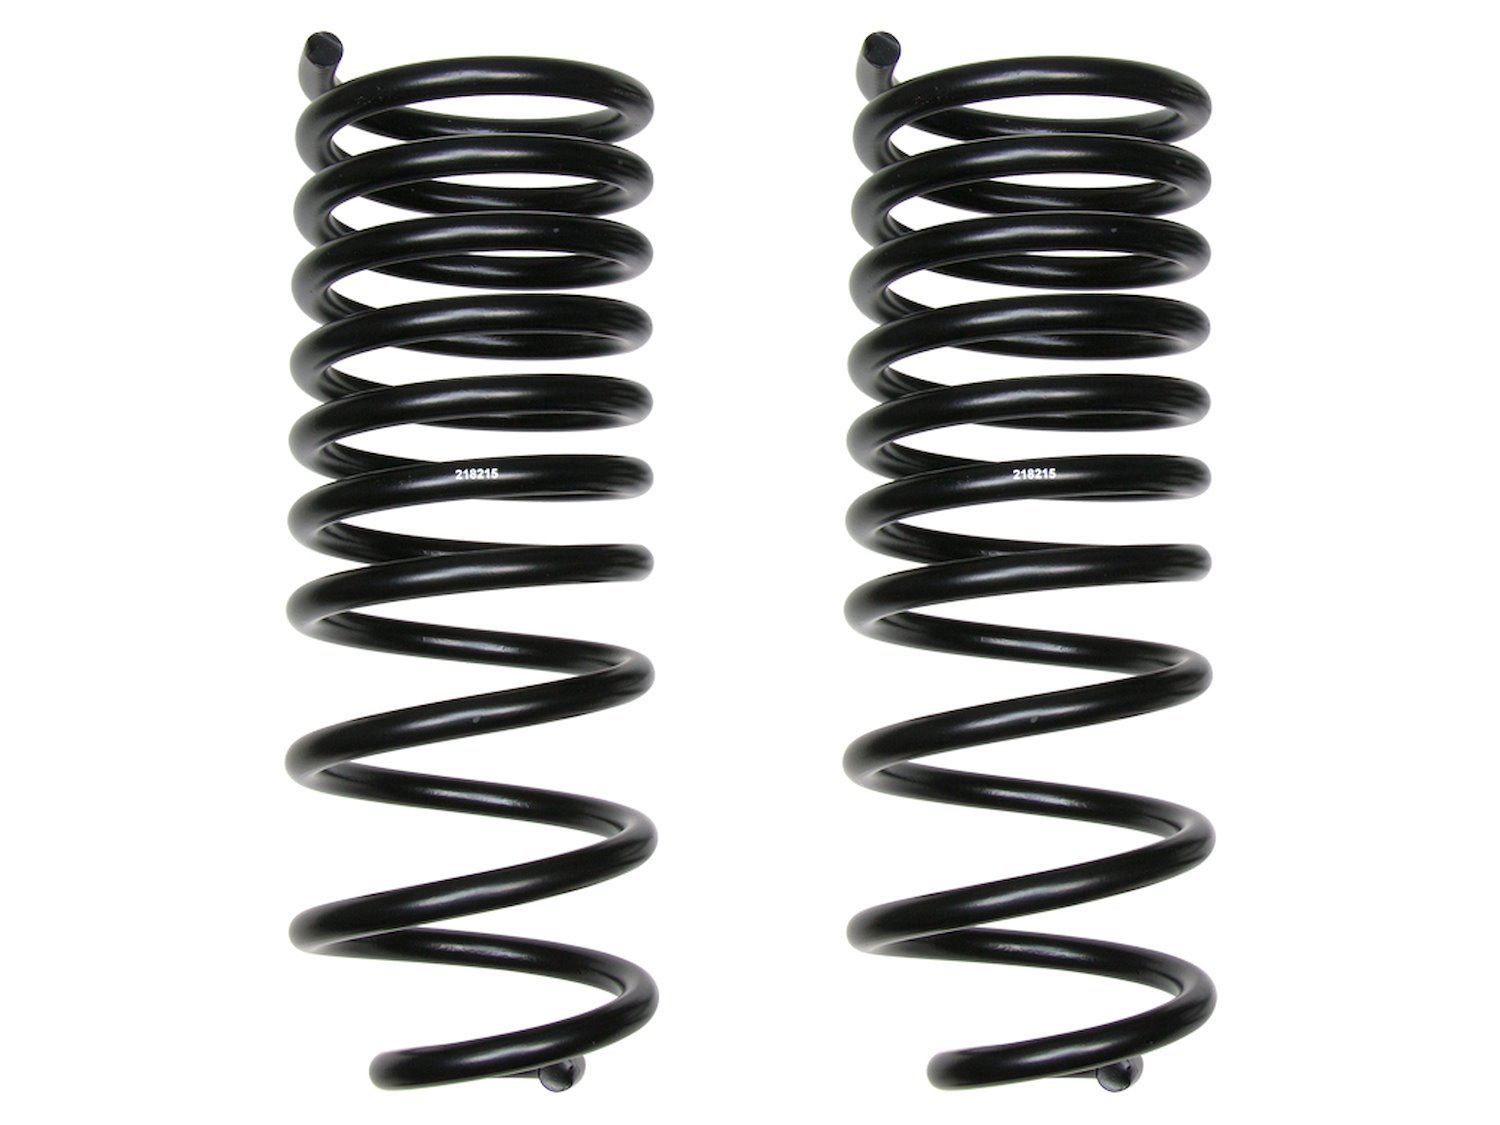 2014-UP RAM 2500 .5 in. LIFT REAR PERFORMANCE SPRING KIT